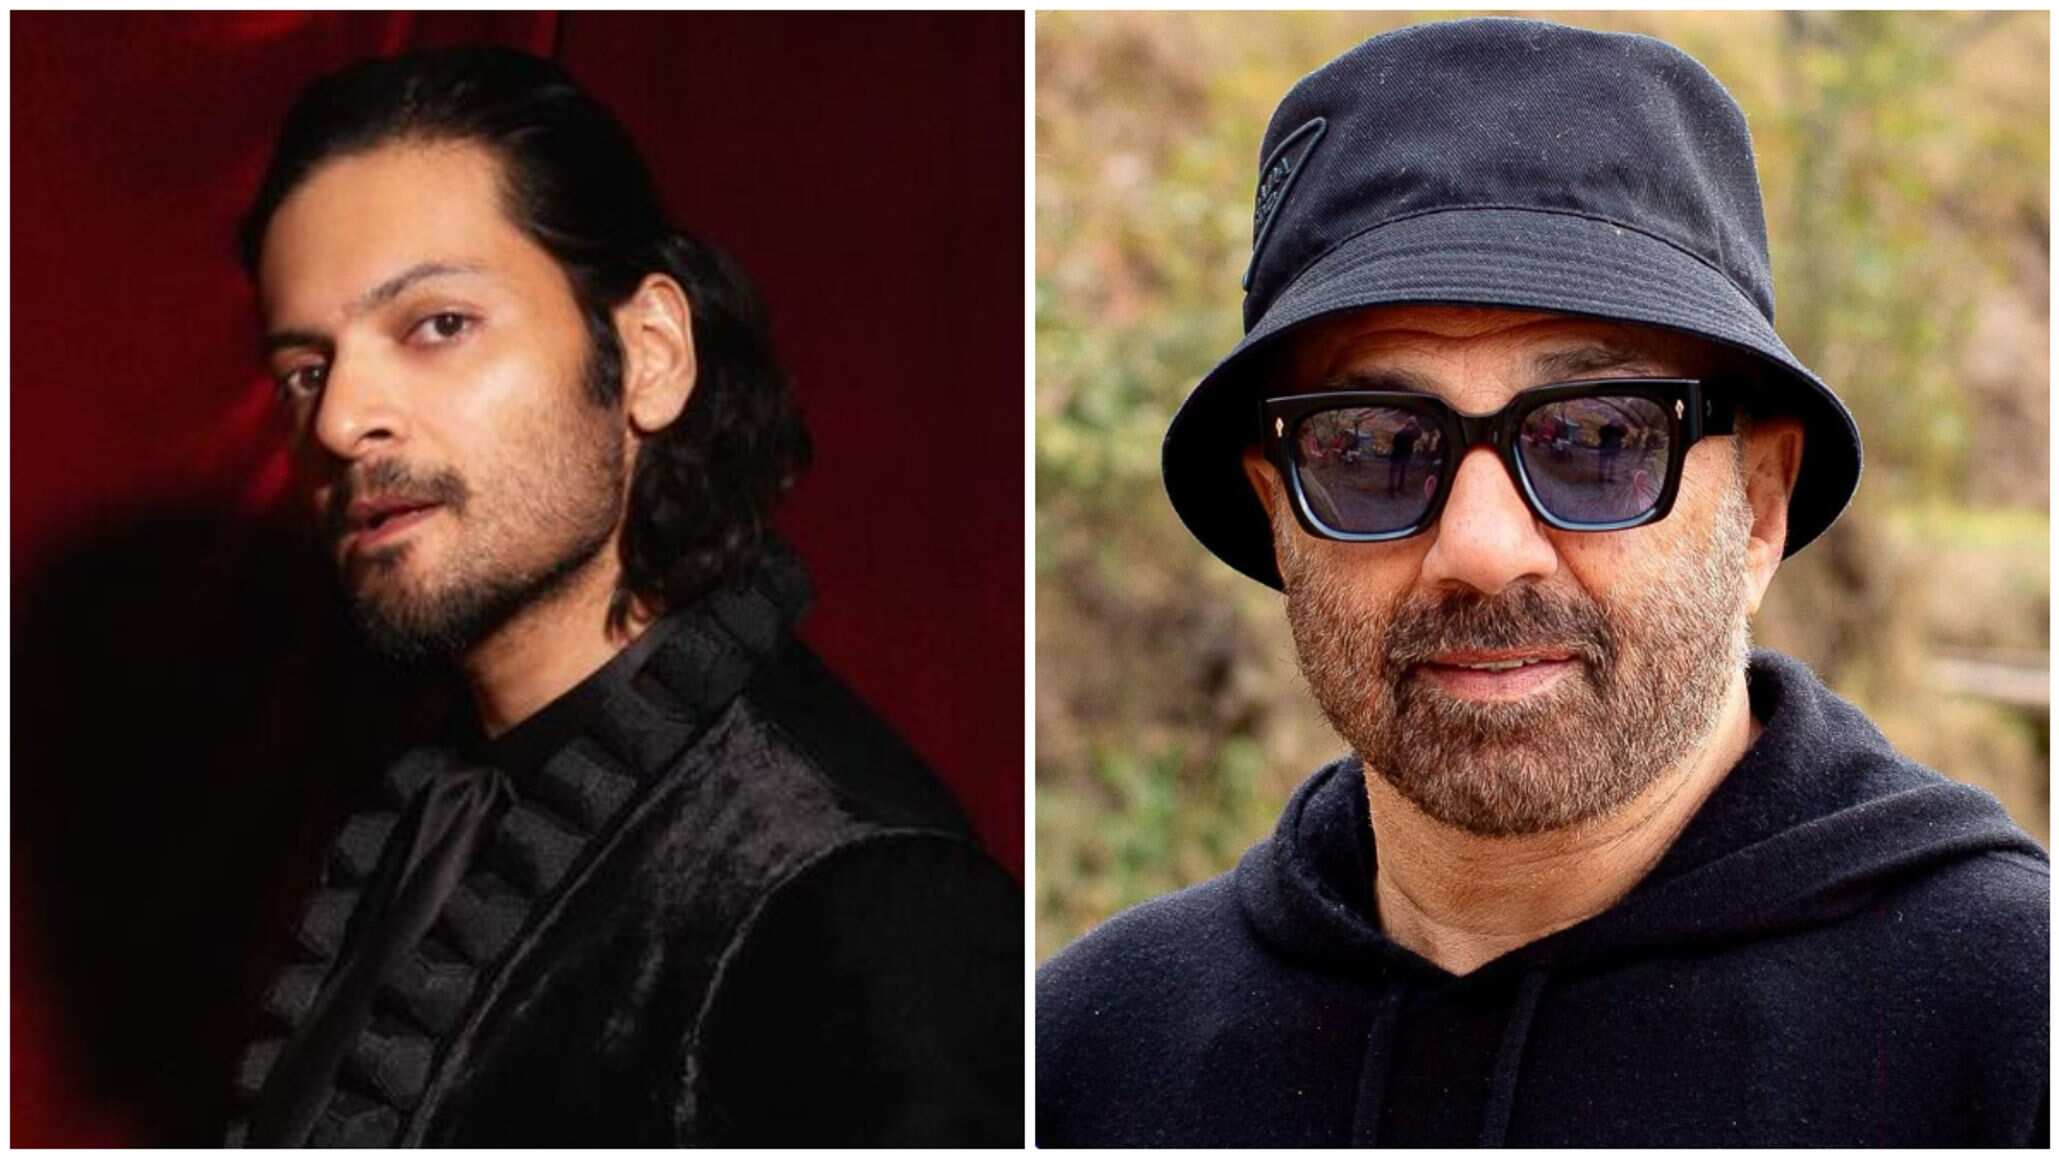 https://www.mobilemasala.com/movies/Ali-Fazal-joins-the-cast-of-Sunny-Deol-starrer-Lahore-1947-Details-wrapped-up-here-i217366